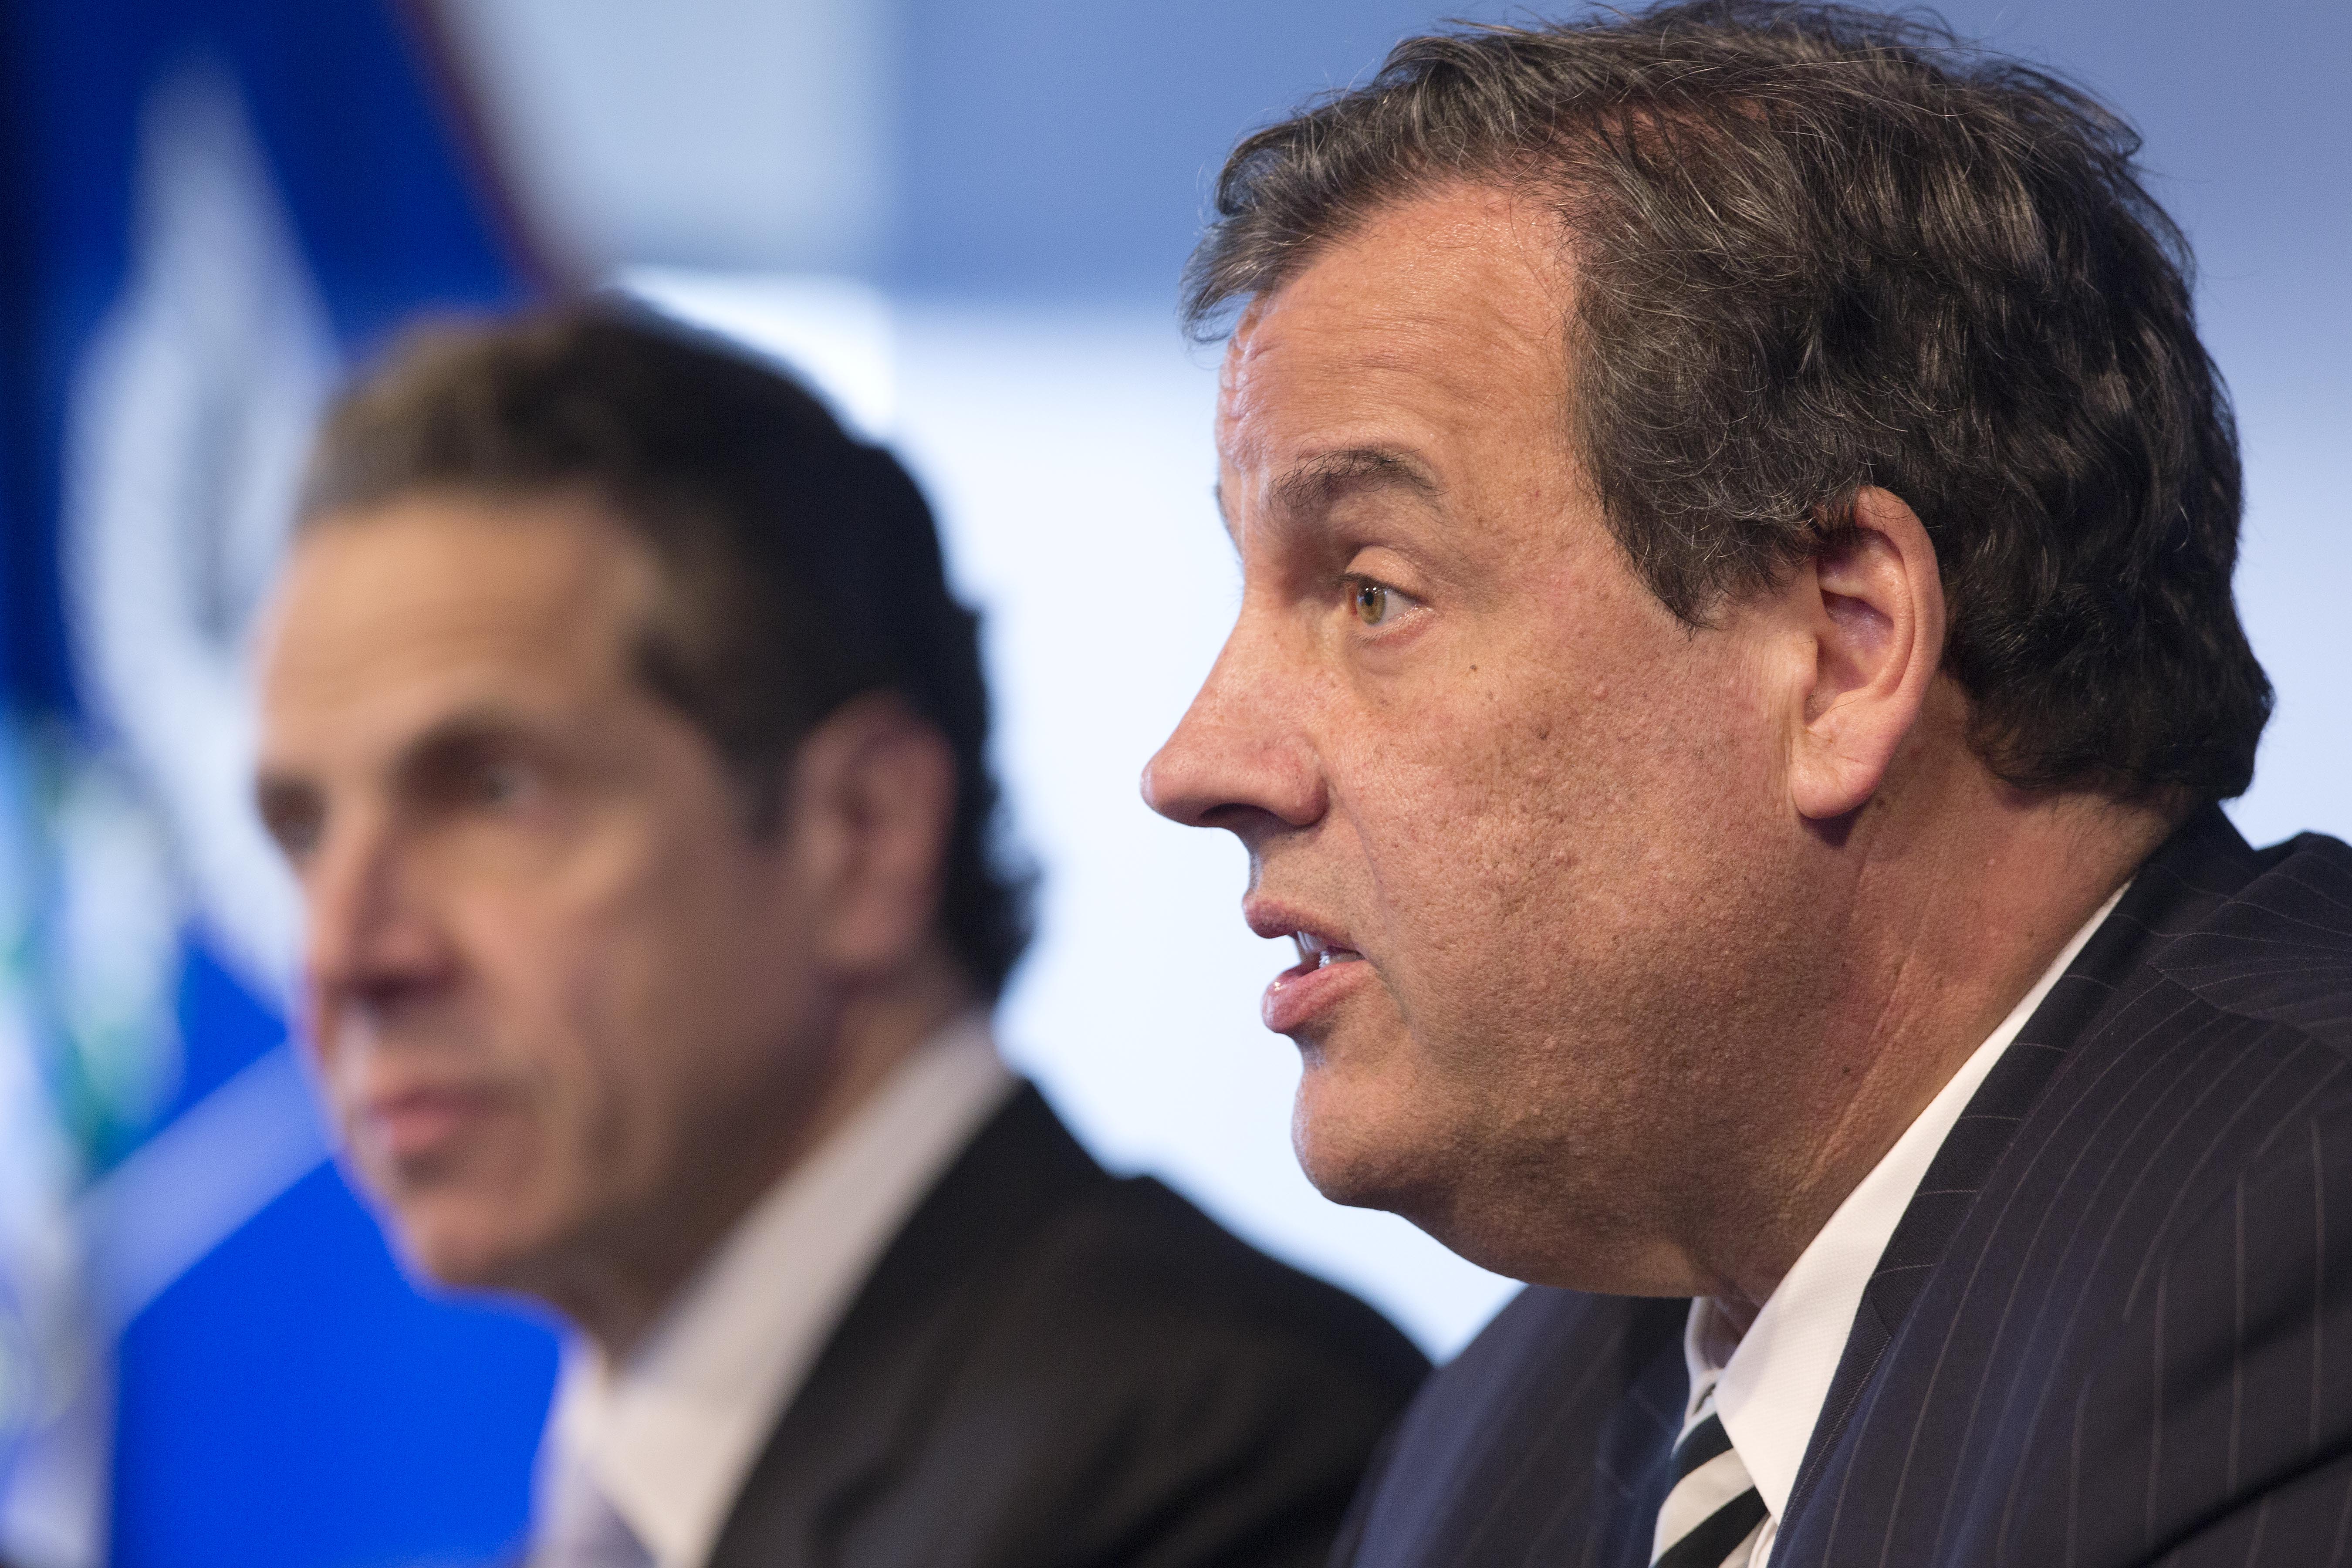 New York Governor Andrew Cuomo, left, listens as New Jersey Governor Chris Christie talks at a news conference on Ebola on Friday, Oct. 24, 2014 in New York. (AP Photo/Mark Lennihan)